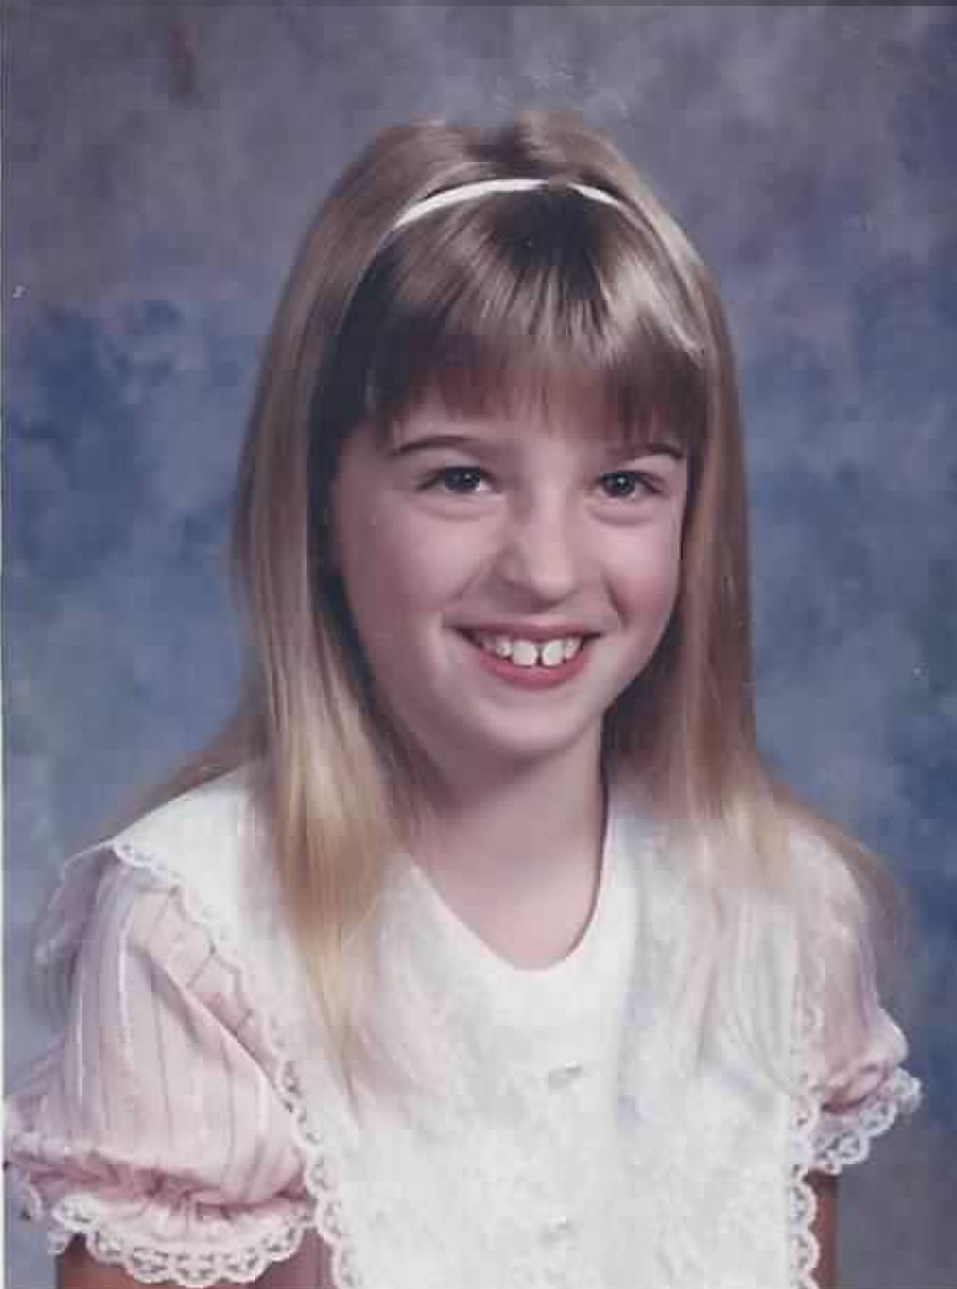 A picture of the author from childhood. A little blonde girl against a blue backdrop.